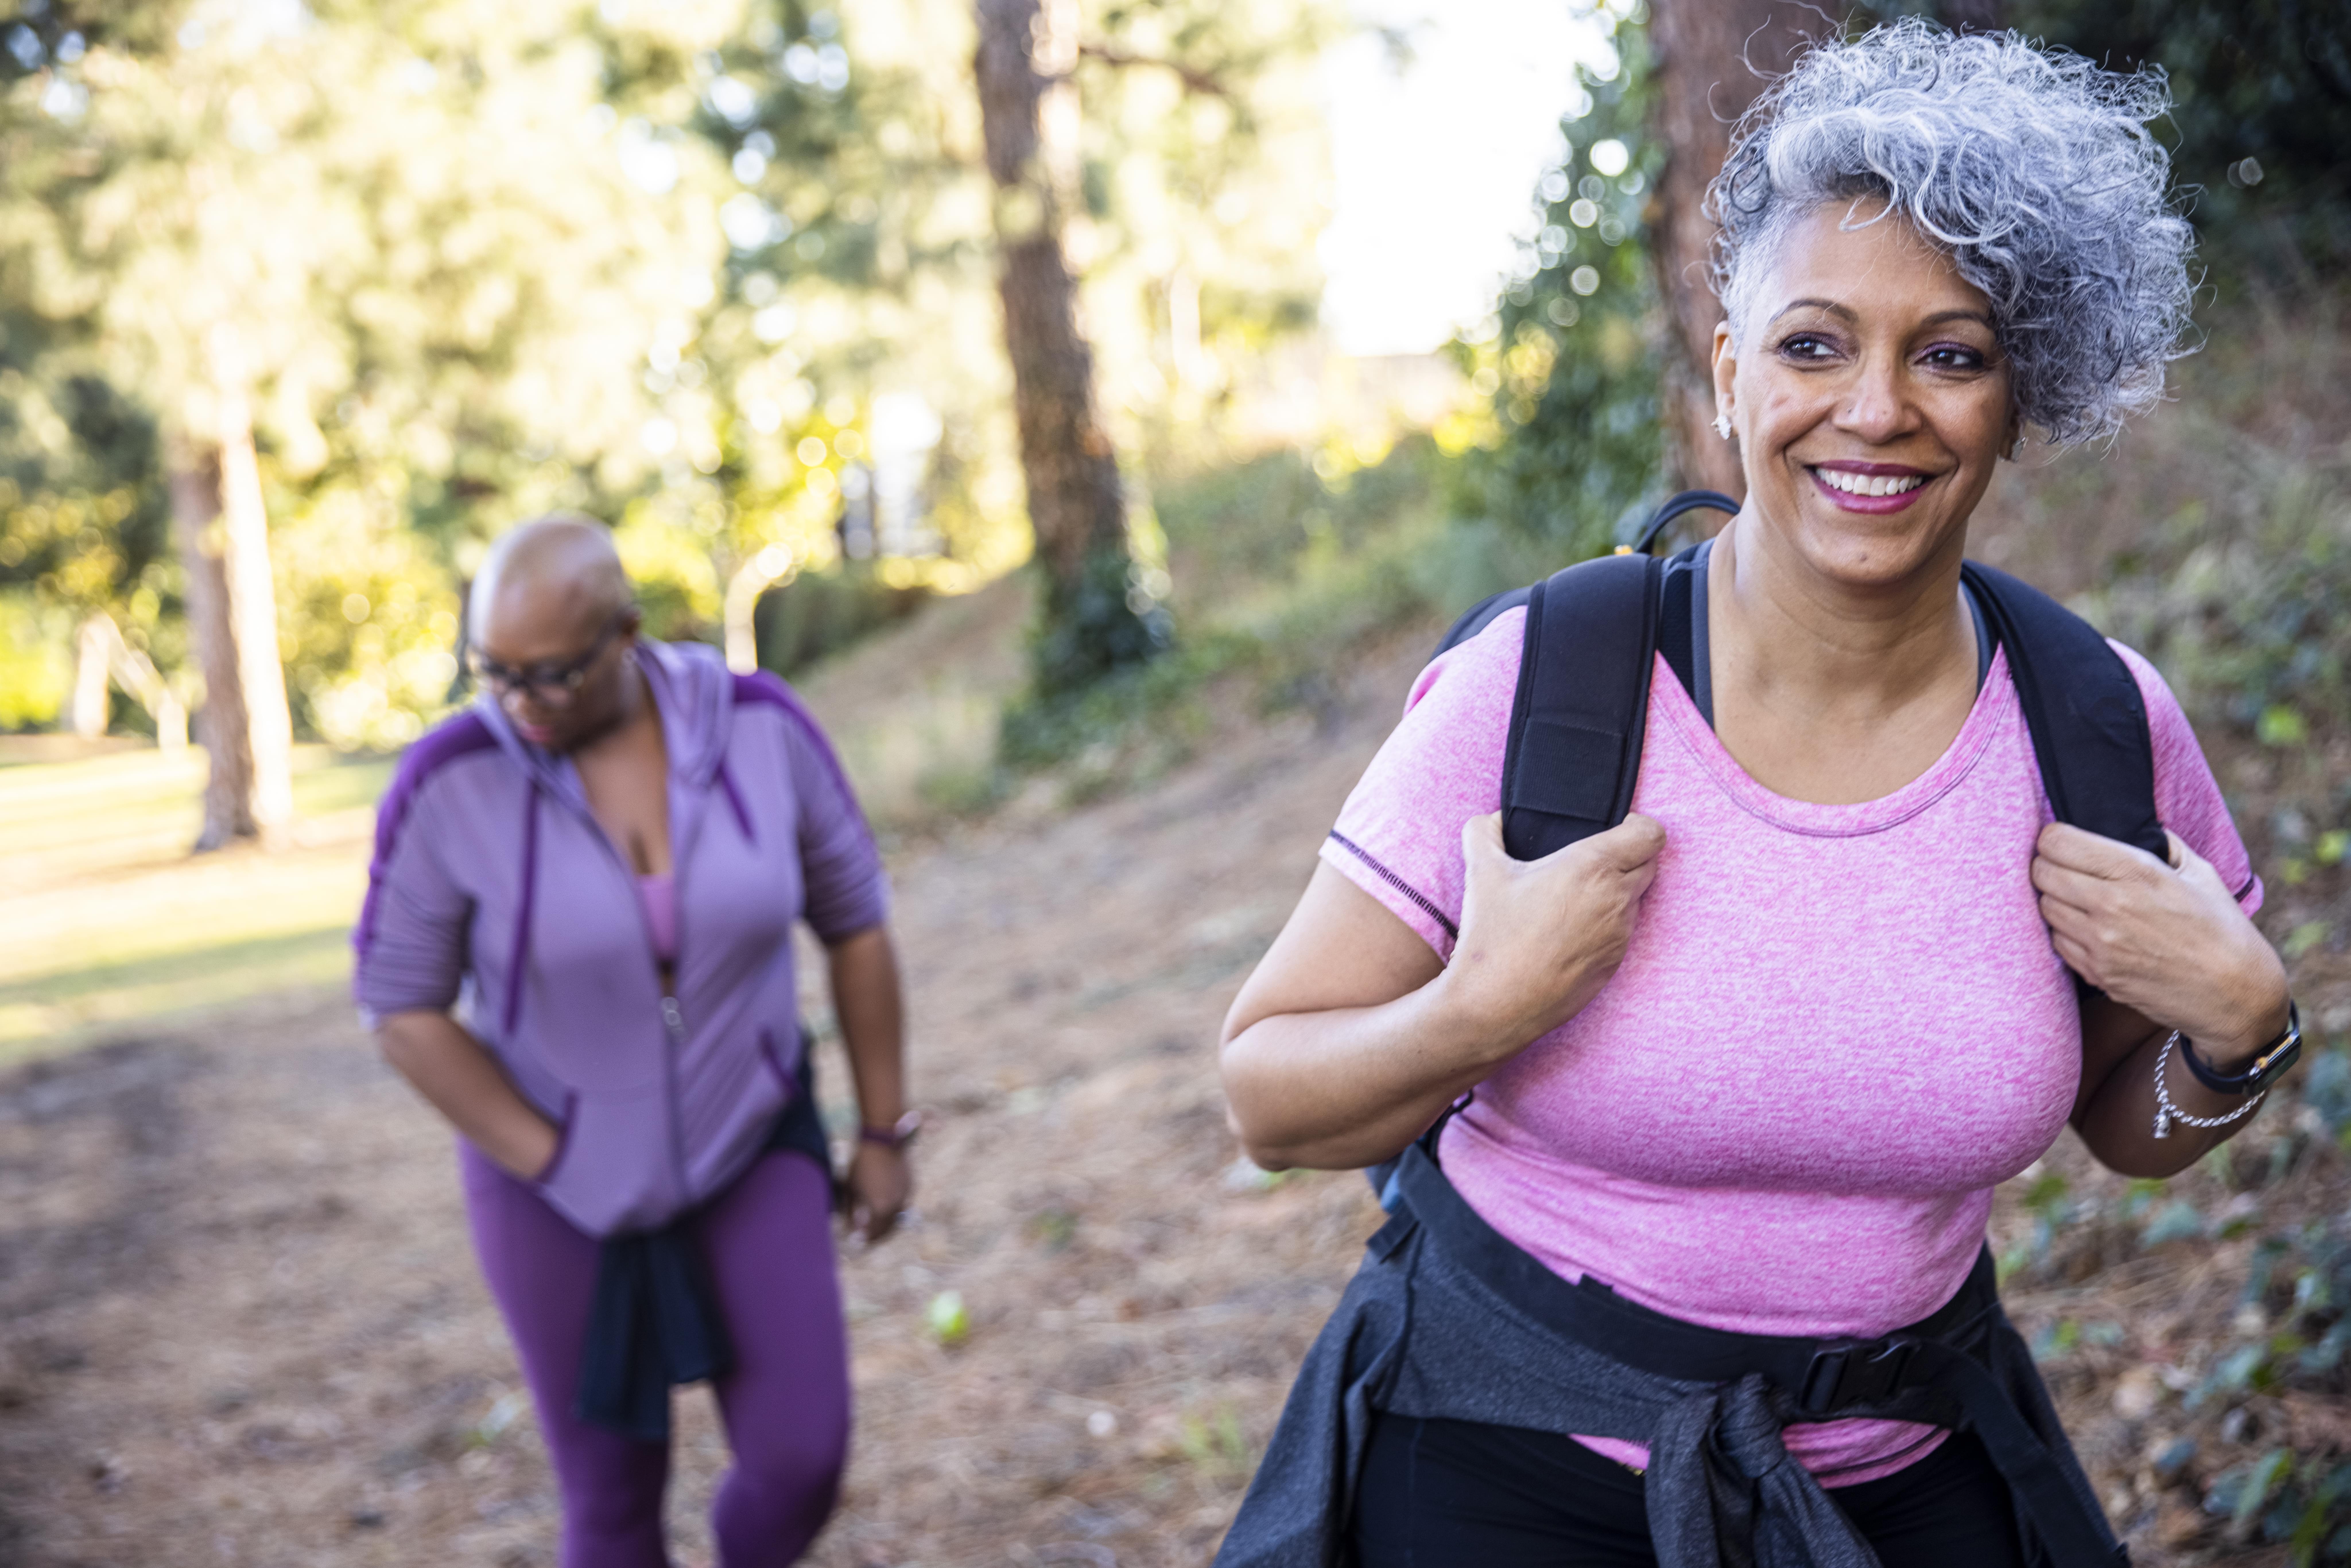 A senior black woman hiking in nature.